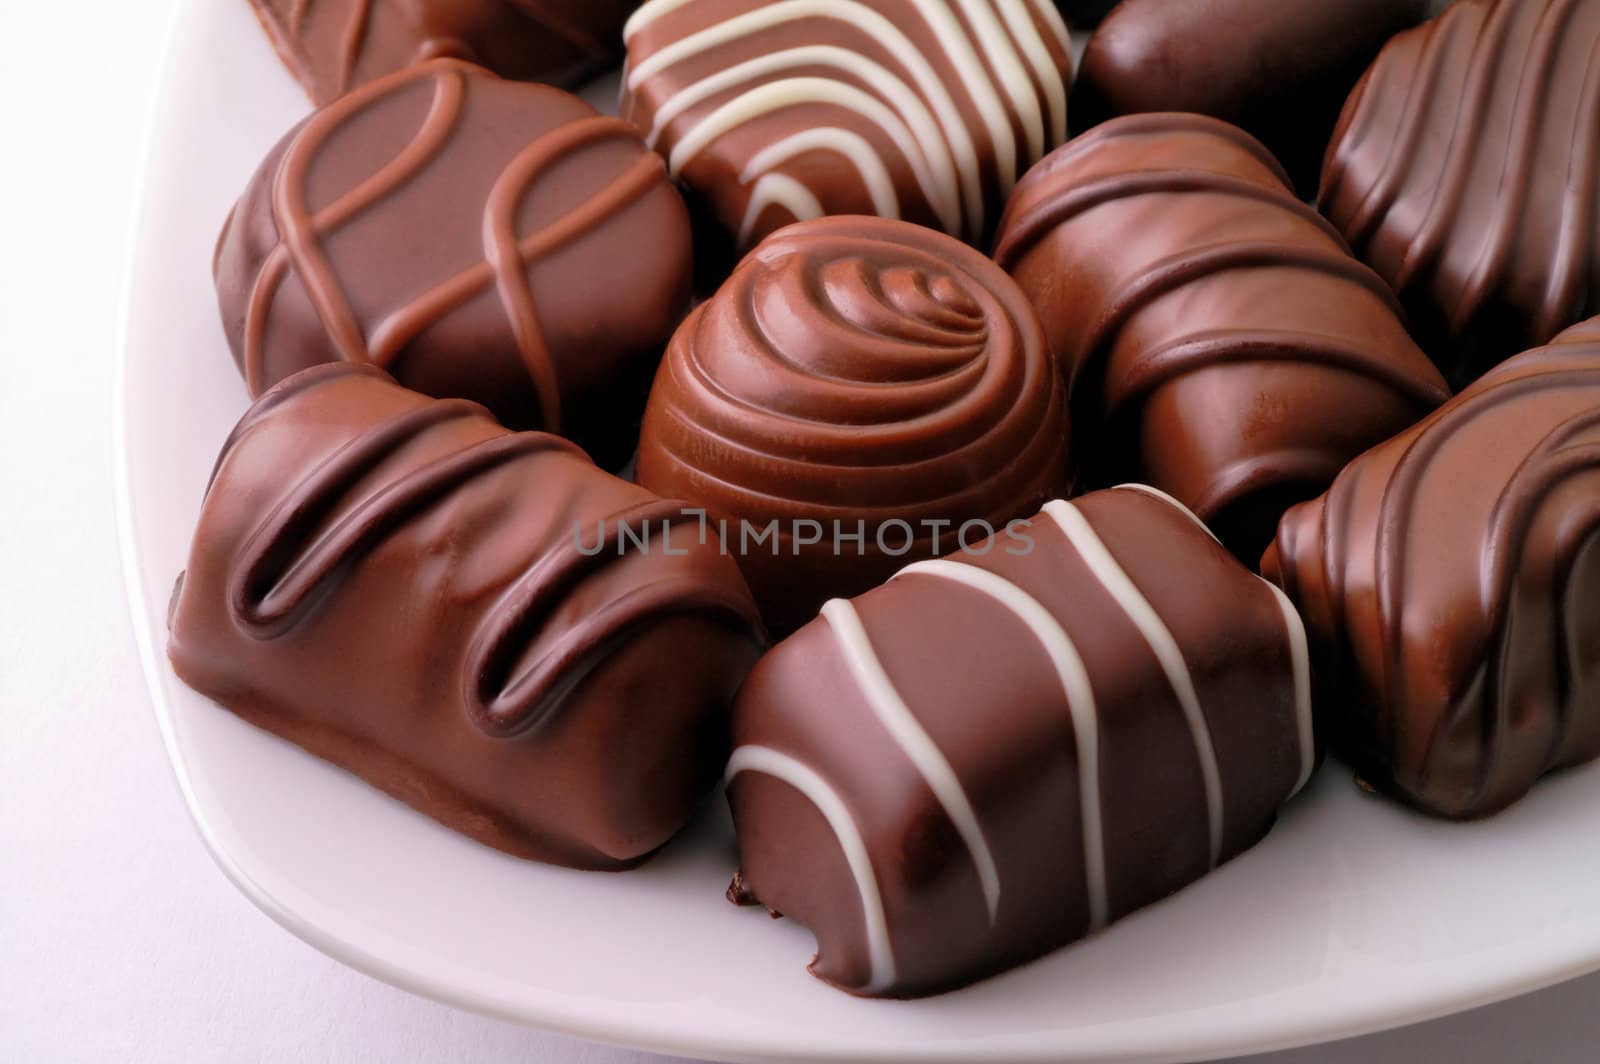 Chocolate candies in a dish by Laborer